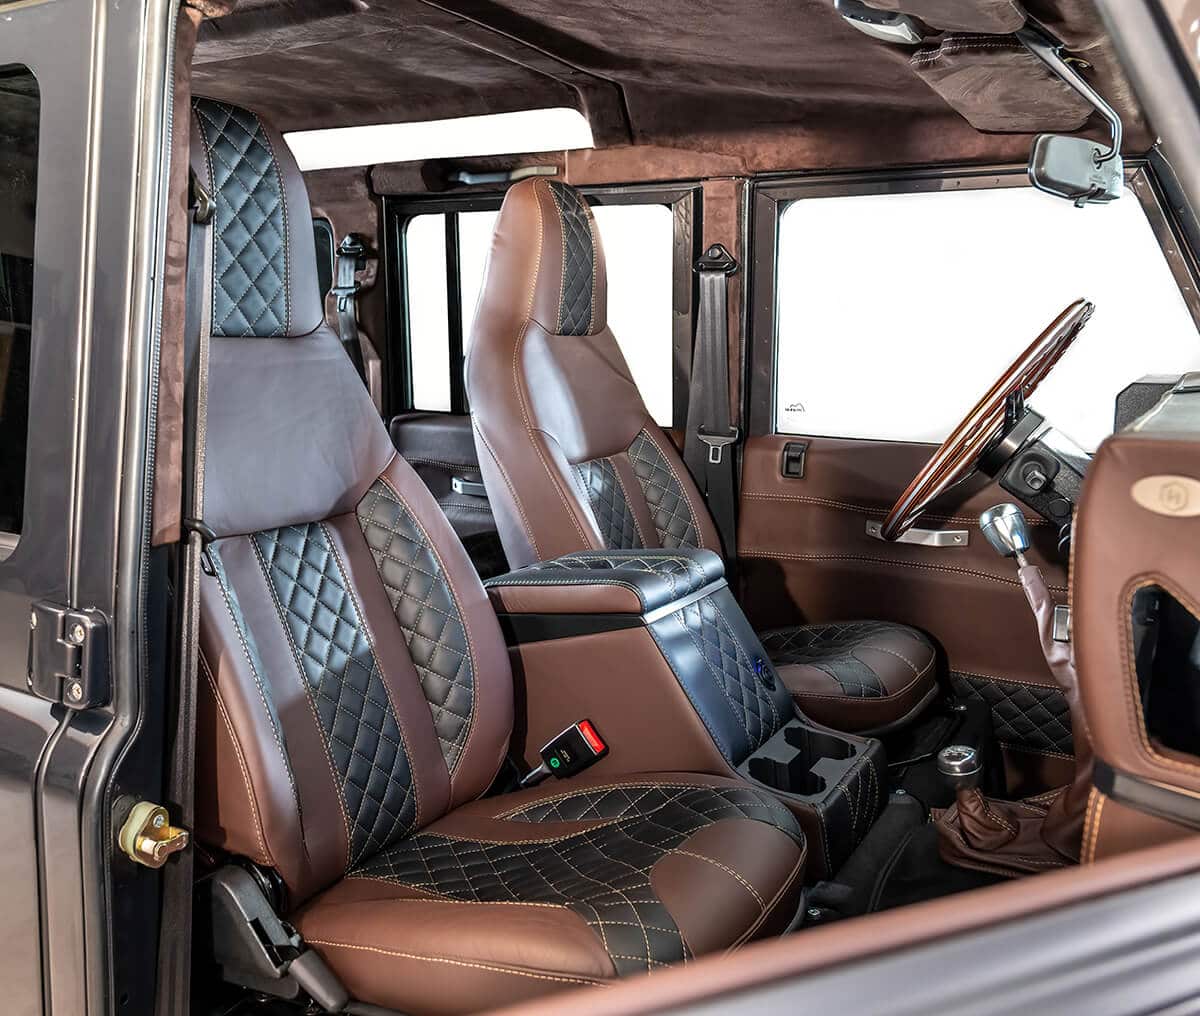 Land Rover Defender D110 Interior: Full Leather Interior Seating, Upper and Lower Dash, Doors